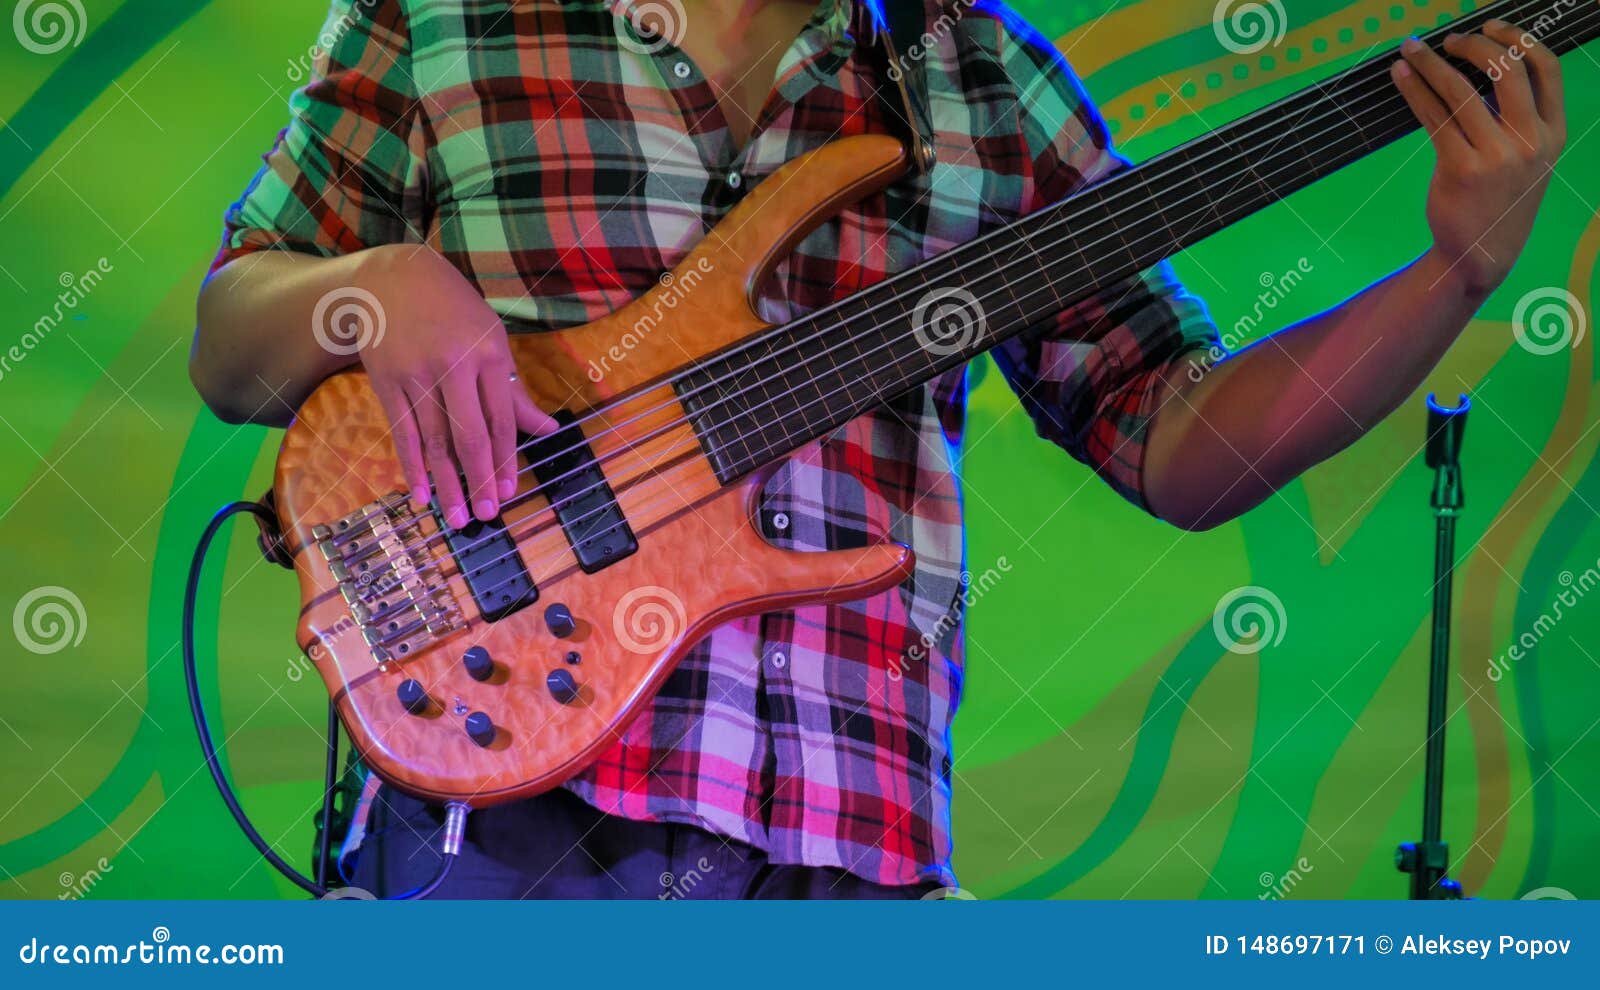 stage plot images bass player